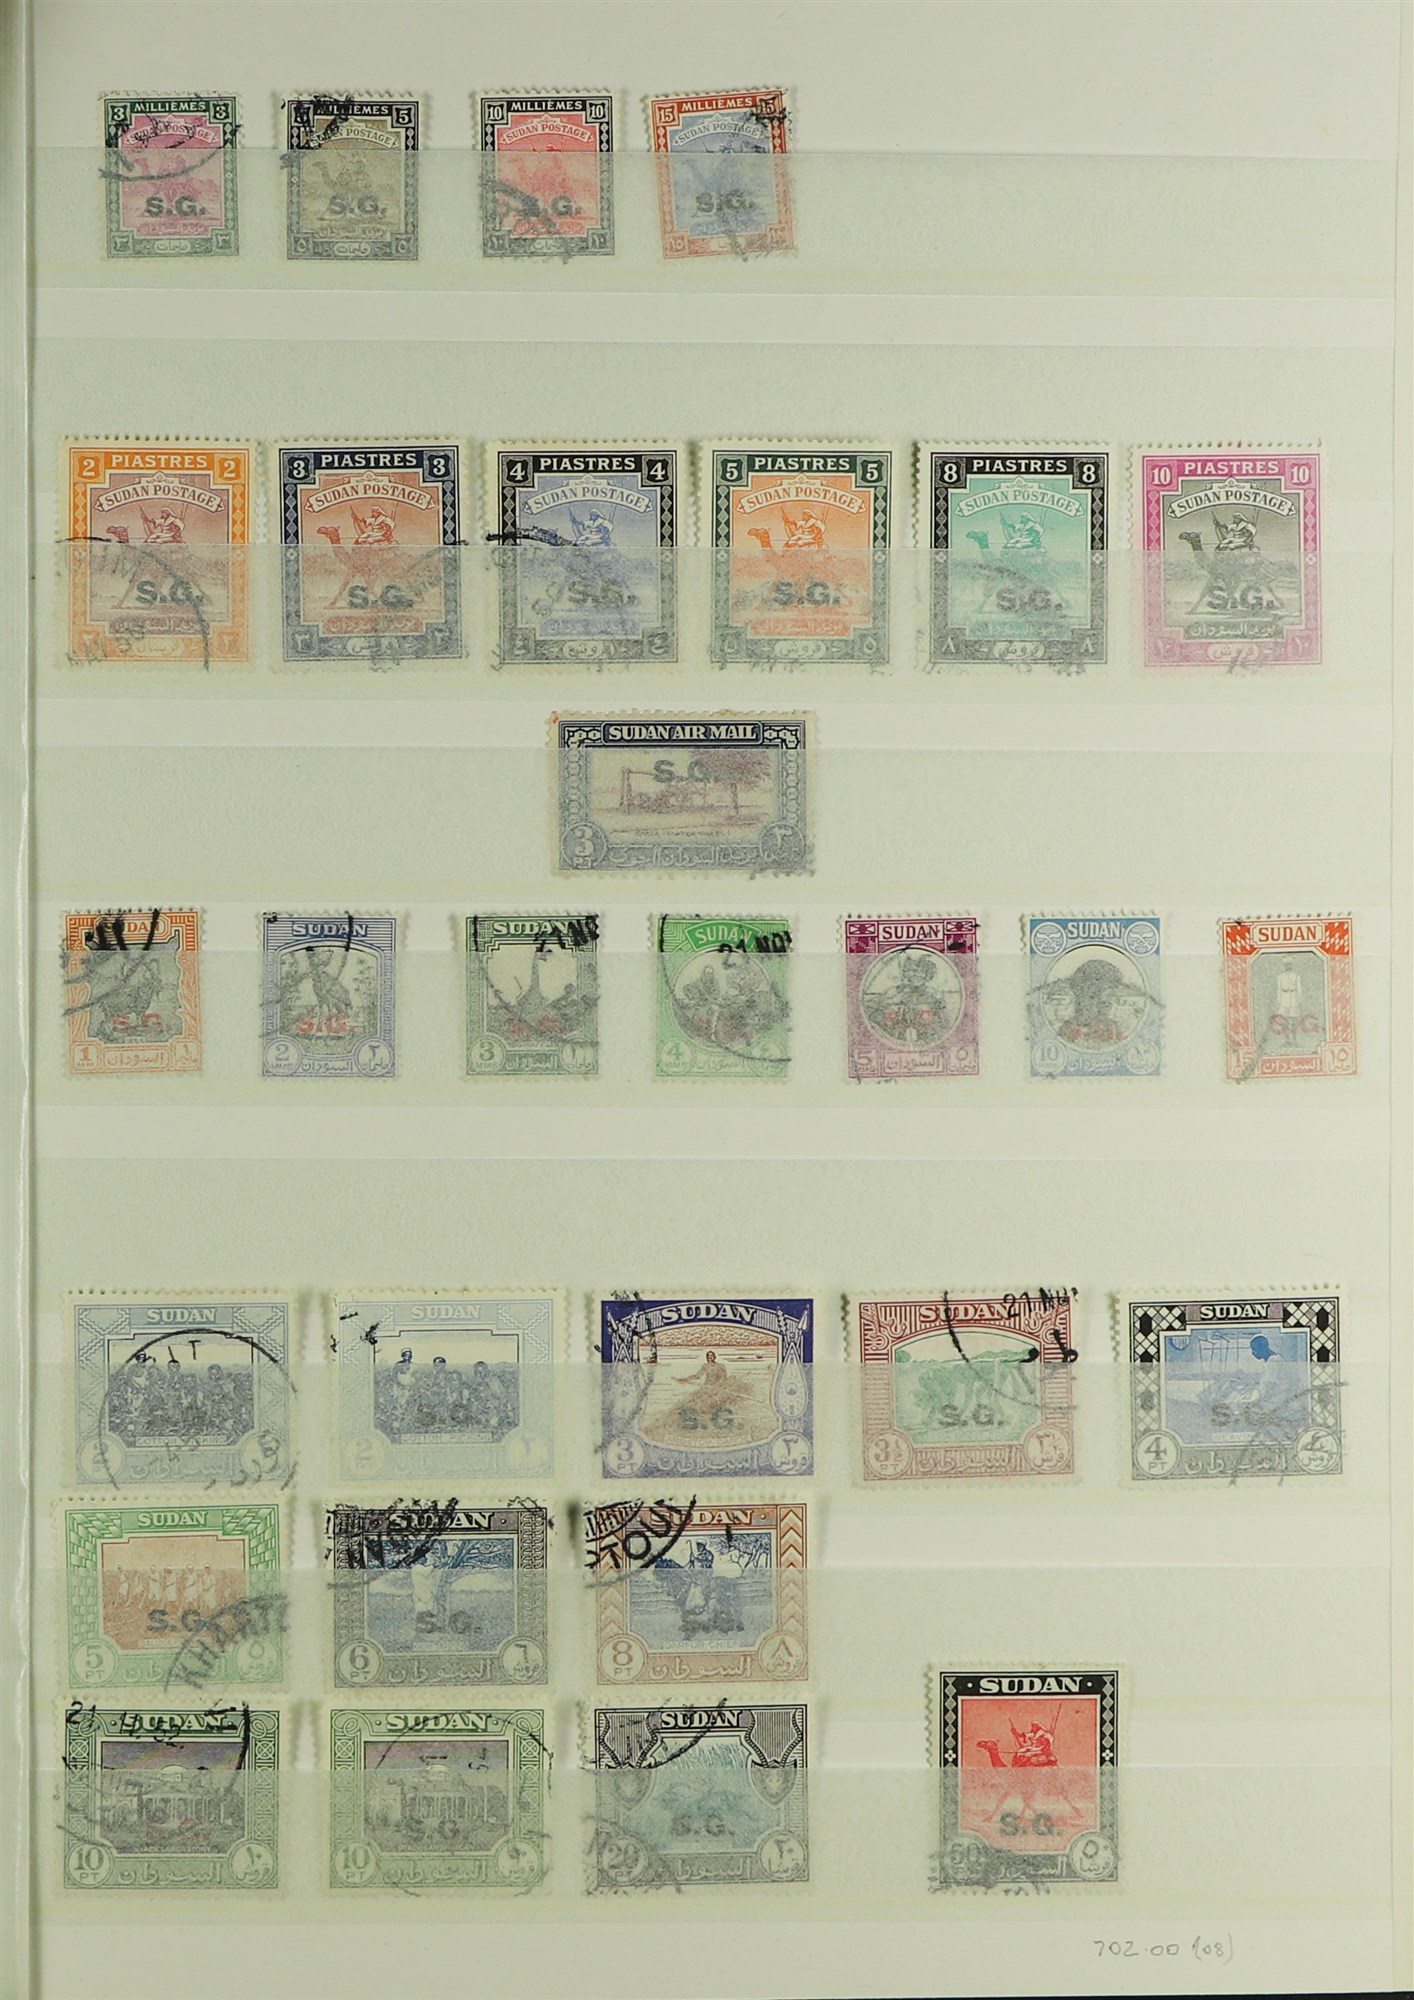 SUDAN 1897 - 1961 USED COLLECTION of 220+ stamps on protective pages, 1897 set to 5pi, 1898 set, - Image 9 of 10